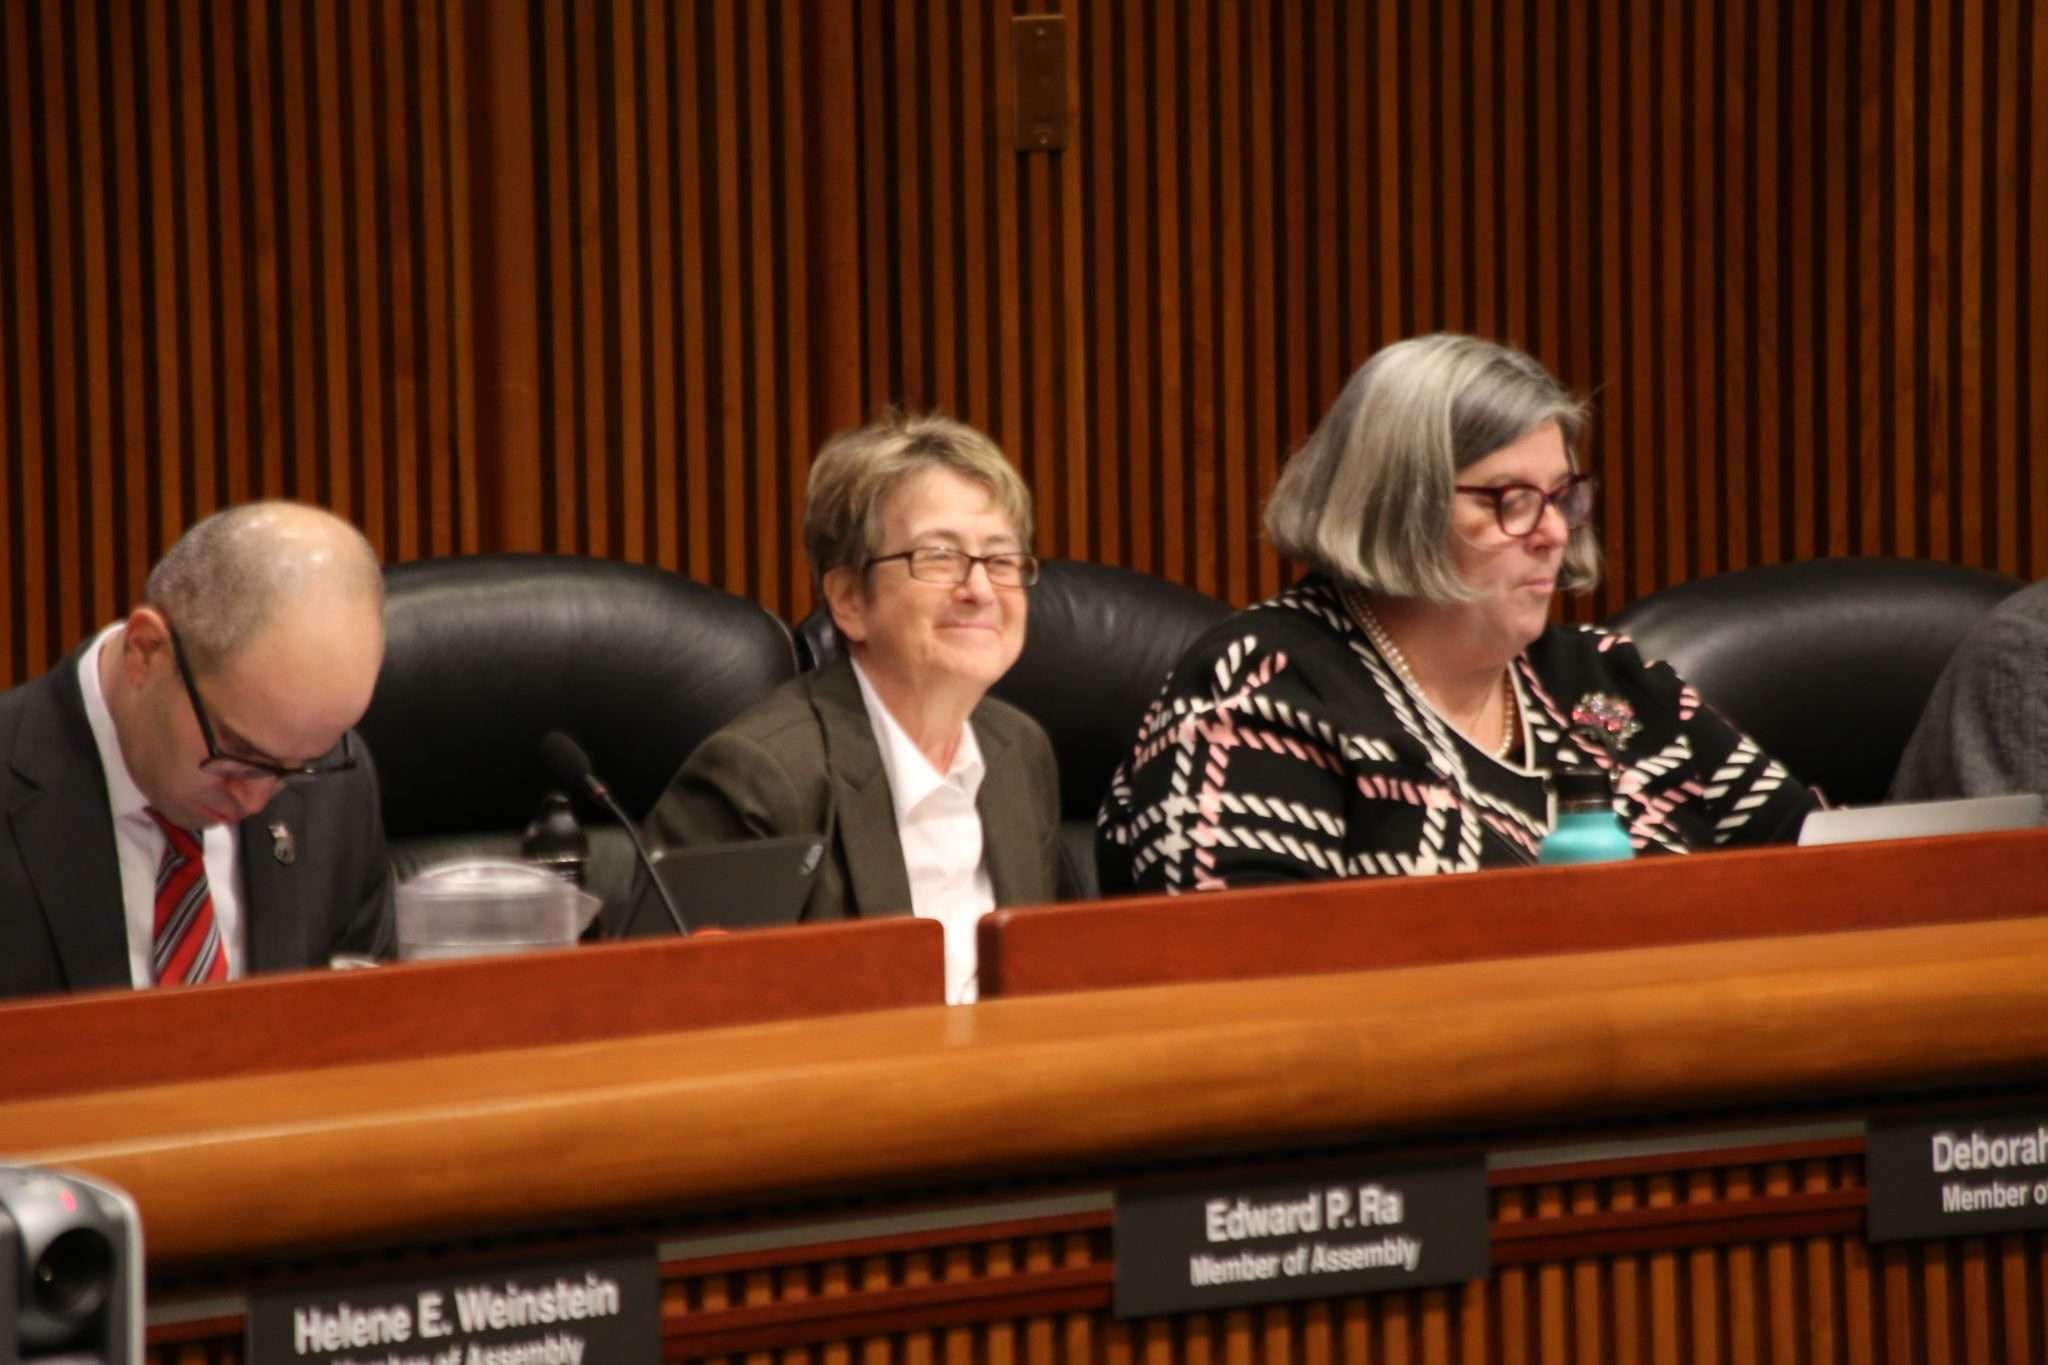 Chair of the state Assembly's Environmental Conservation Committee Deb Glick, second from the left, listens on Feb. 14 to the 2023 joint budget hearing on agriculture, environmental conservation and energy at the New York State Capitol in Albany. Photo by Gwendolyn Craig